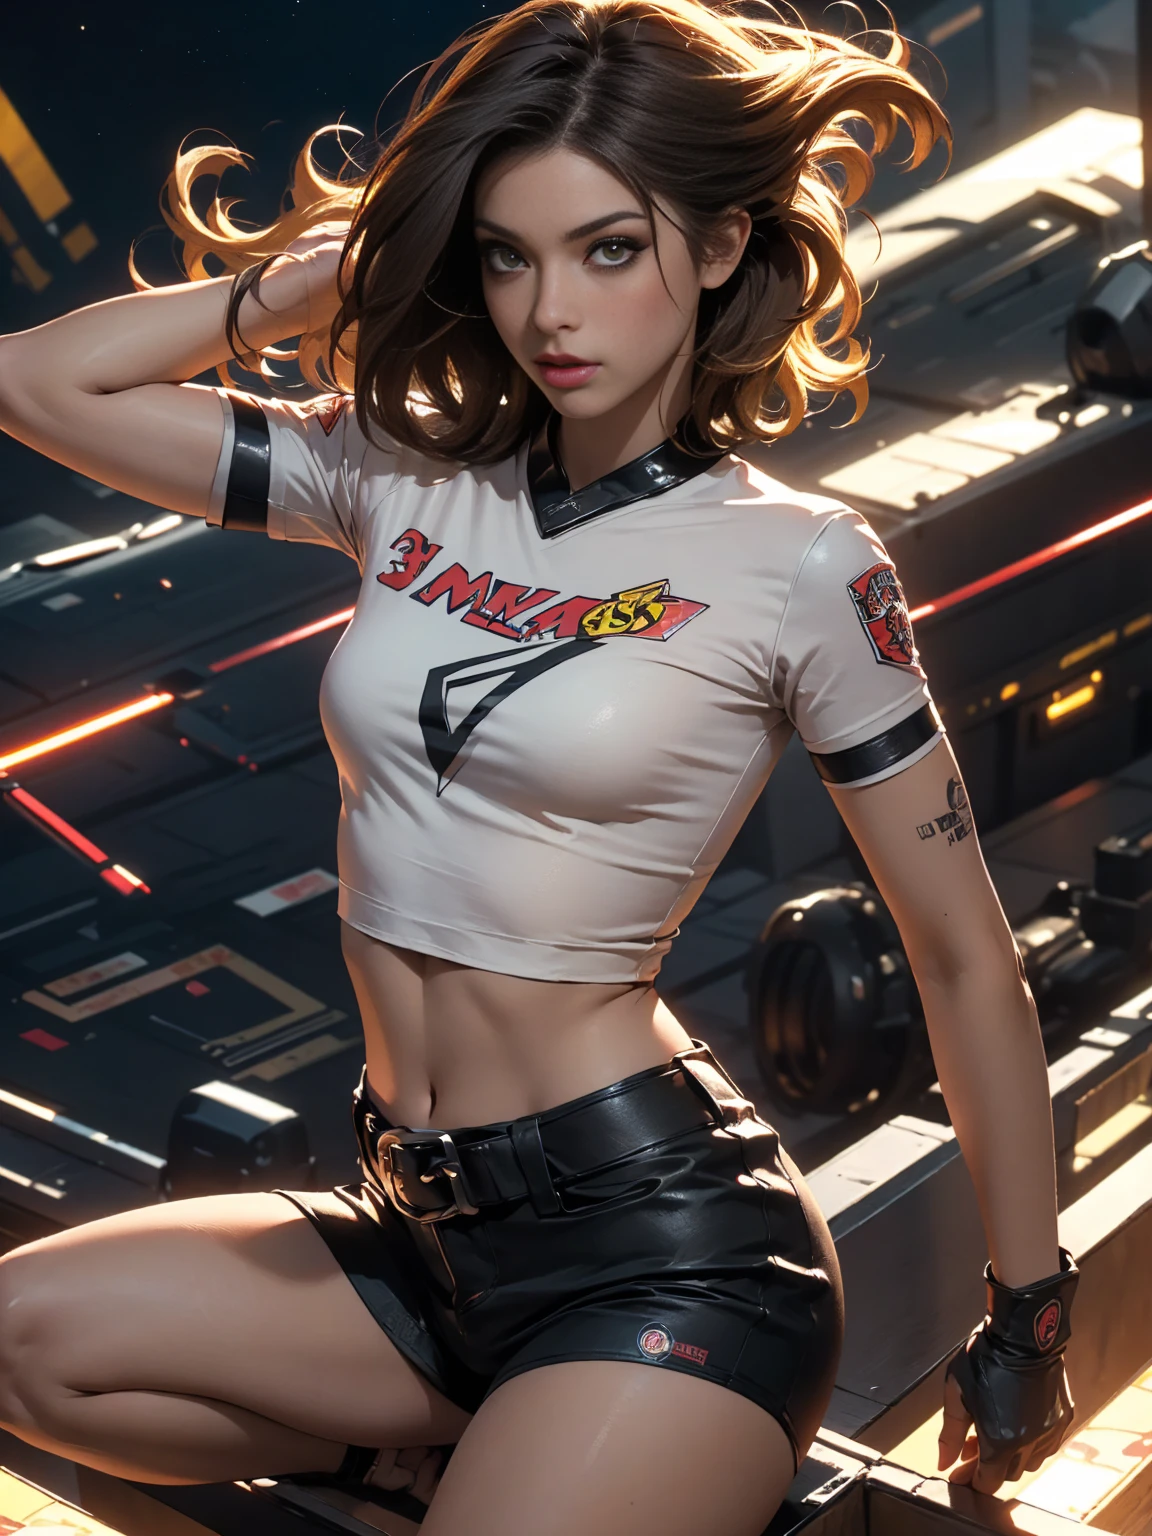 CG K Ultrarealistic ,((premium、8k、32K、masterpiece、NffSW:1.3)), (superfine illustration)、(super high resolution), (((adult body))), (((1 girl in))), ((( short hair bob ))), 25 year old cyberpunk gladiator with perfect body, Shoulder pads with metal spikes., Gladiadores in Brooklyn, (( short hair bob )), Torn rugby team t-shirt, Almost naked in the wild urban style of Simon Bisley, short blonde hair, minimal clothing, Metallic protection on the left arm with complex graphics..., Dark red with white stars and blue and white stripes.,(( dynamic action pose:1.5)), armor, Full of spikes and rivets., poison tattoo (((Image from the knee up))), short white blonde hair, In the background、 There is a wall with an intricate design painted by Shepard Fairey...